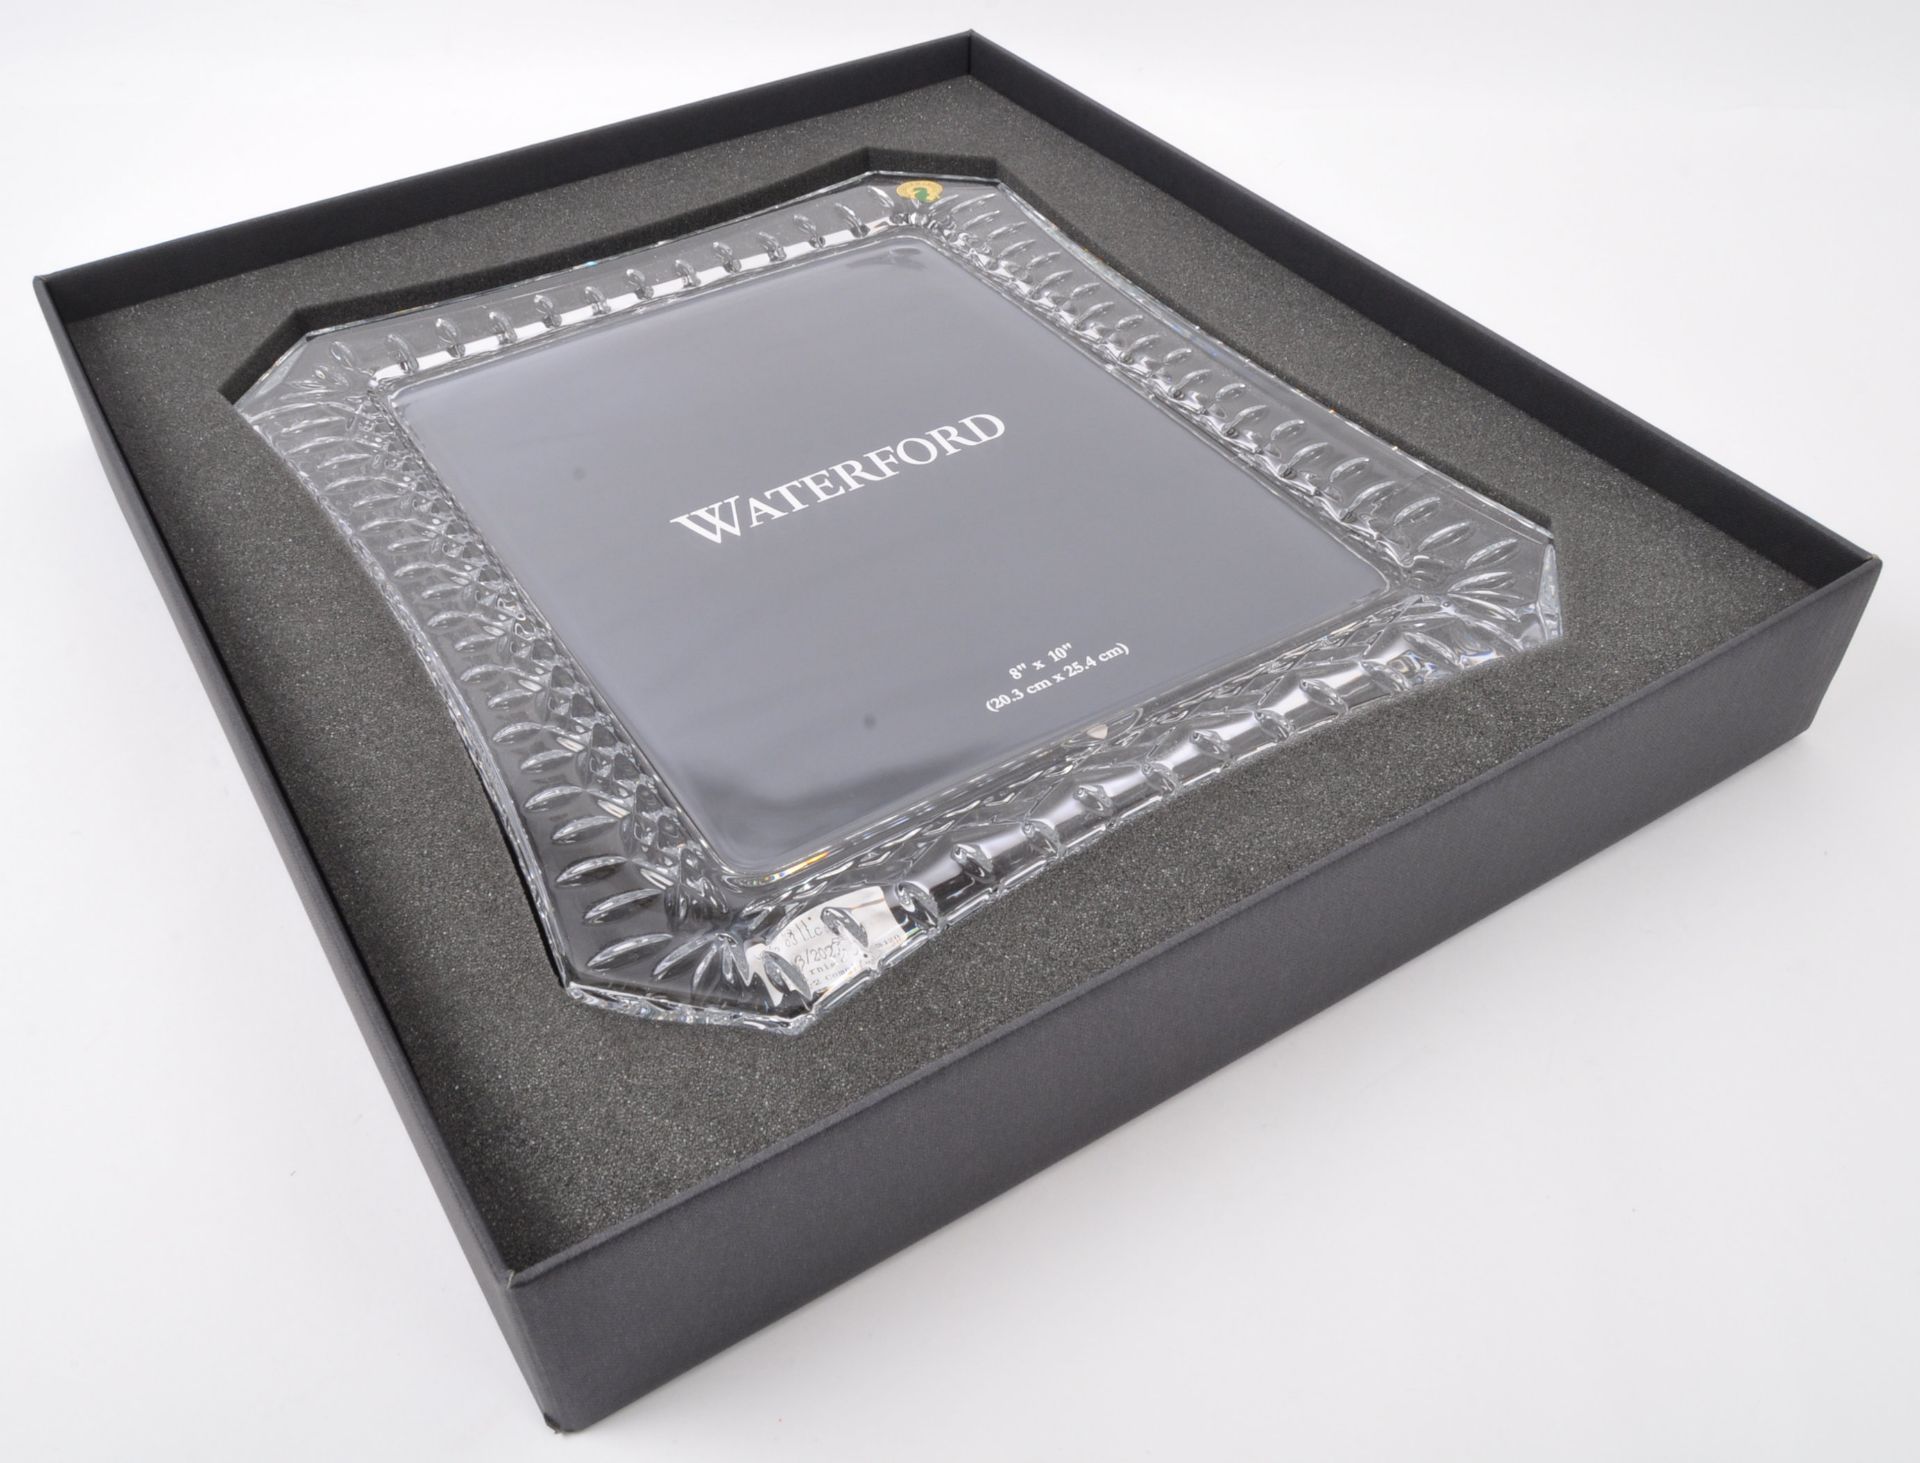 NOS WATERFORD CRYSTAL LISMORE PHOTO FRAME IN BOX - Image 4 of 6